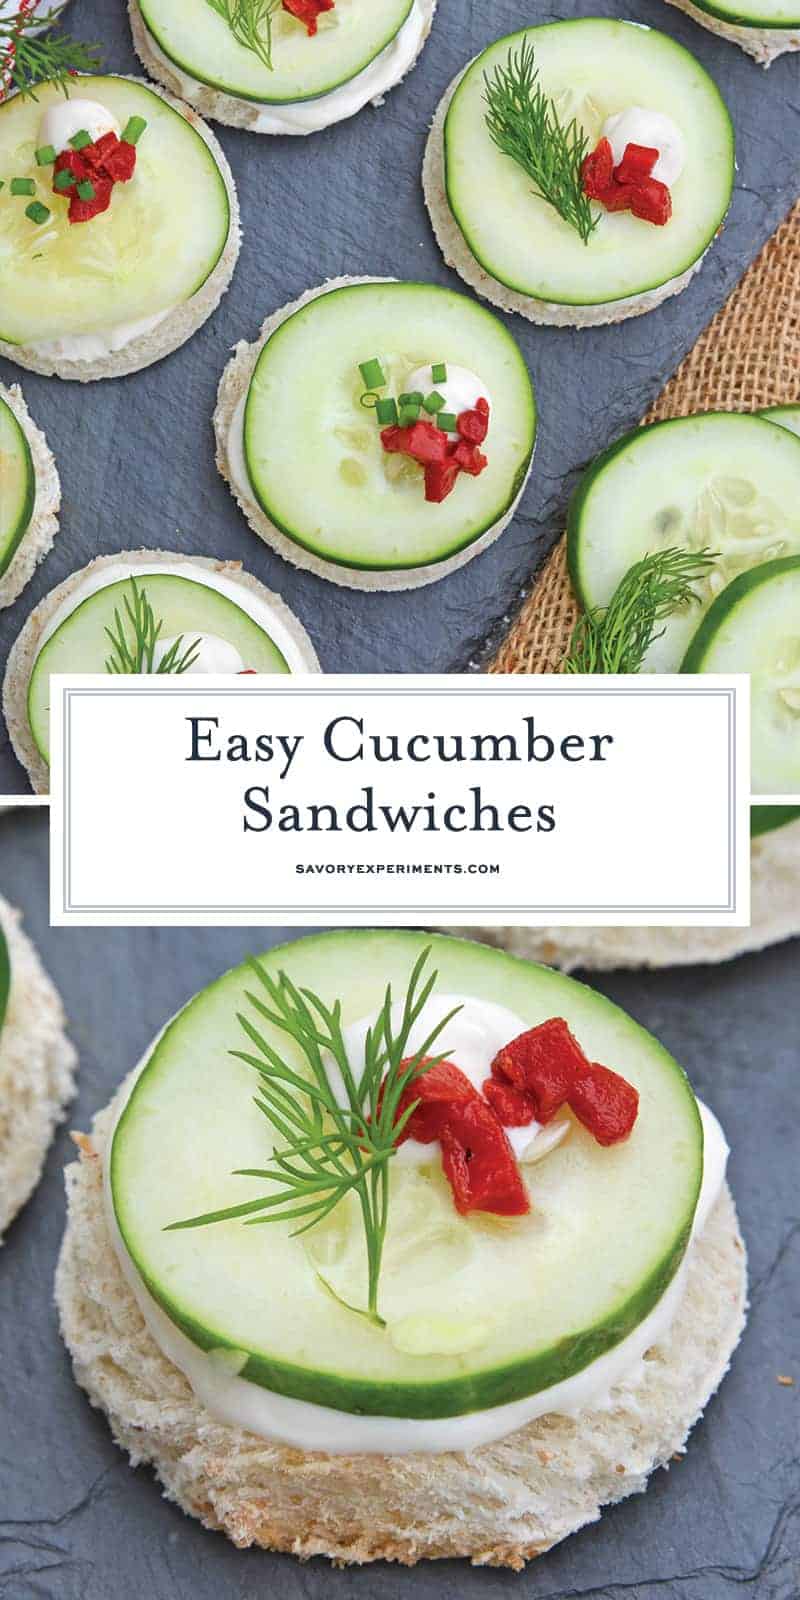 These Cucumber Sandwiches, or cucumber canapes, are easy tea sandwiches that are perfect for any get-together, including holiday parties. #cucumbersandwiches #cucumbercanapes #teasandwiches www.savoryexperiments.com